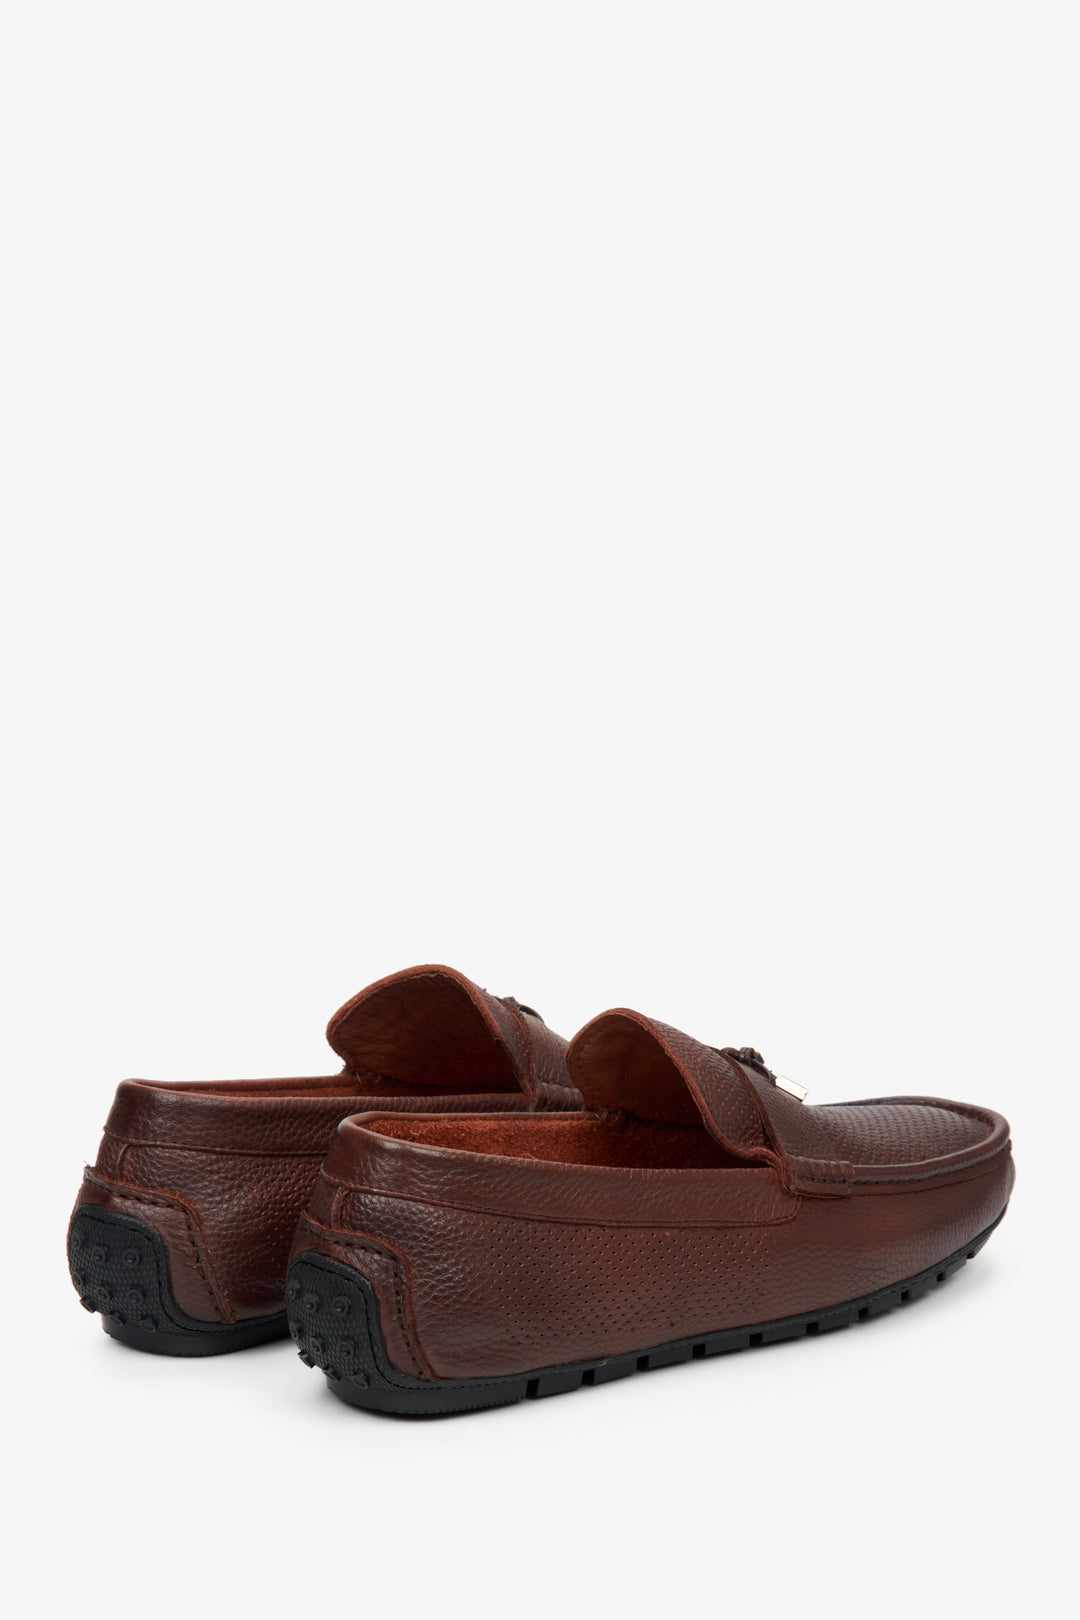 Men's brown leather loafers by Estro for fall - close-up on the heel and side seam of the shoes.